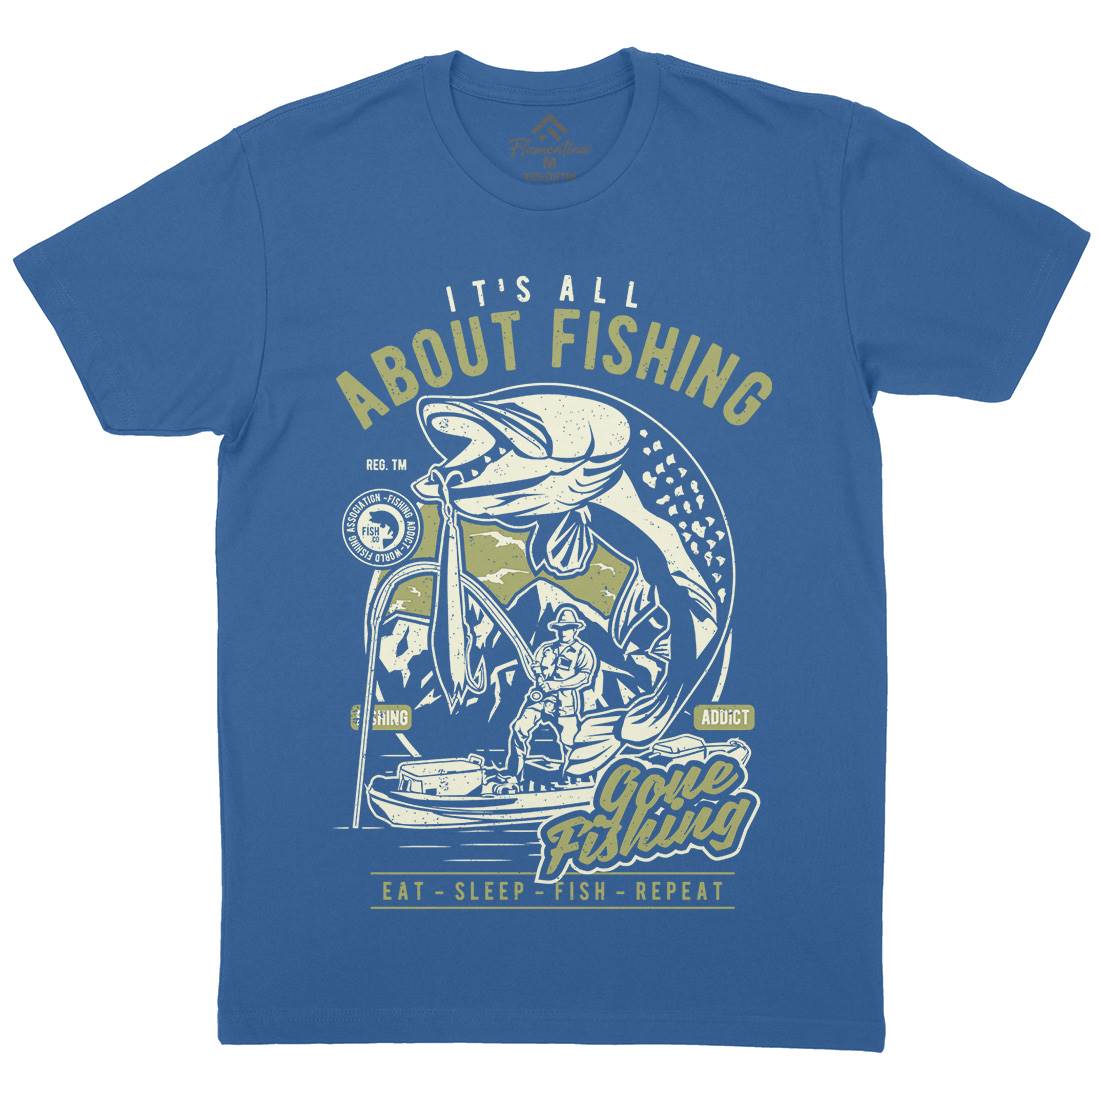 All About Mens Crew Neck T-Shirt Fishing A604